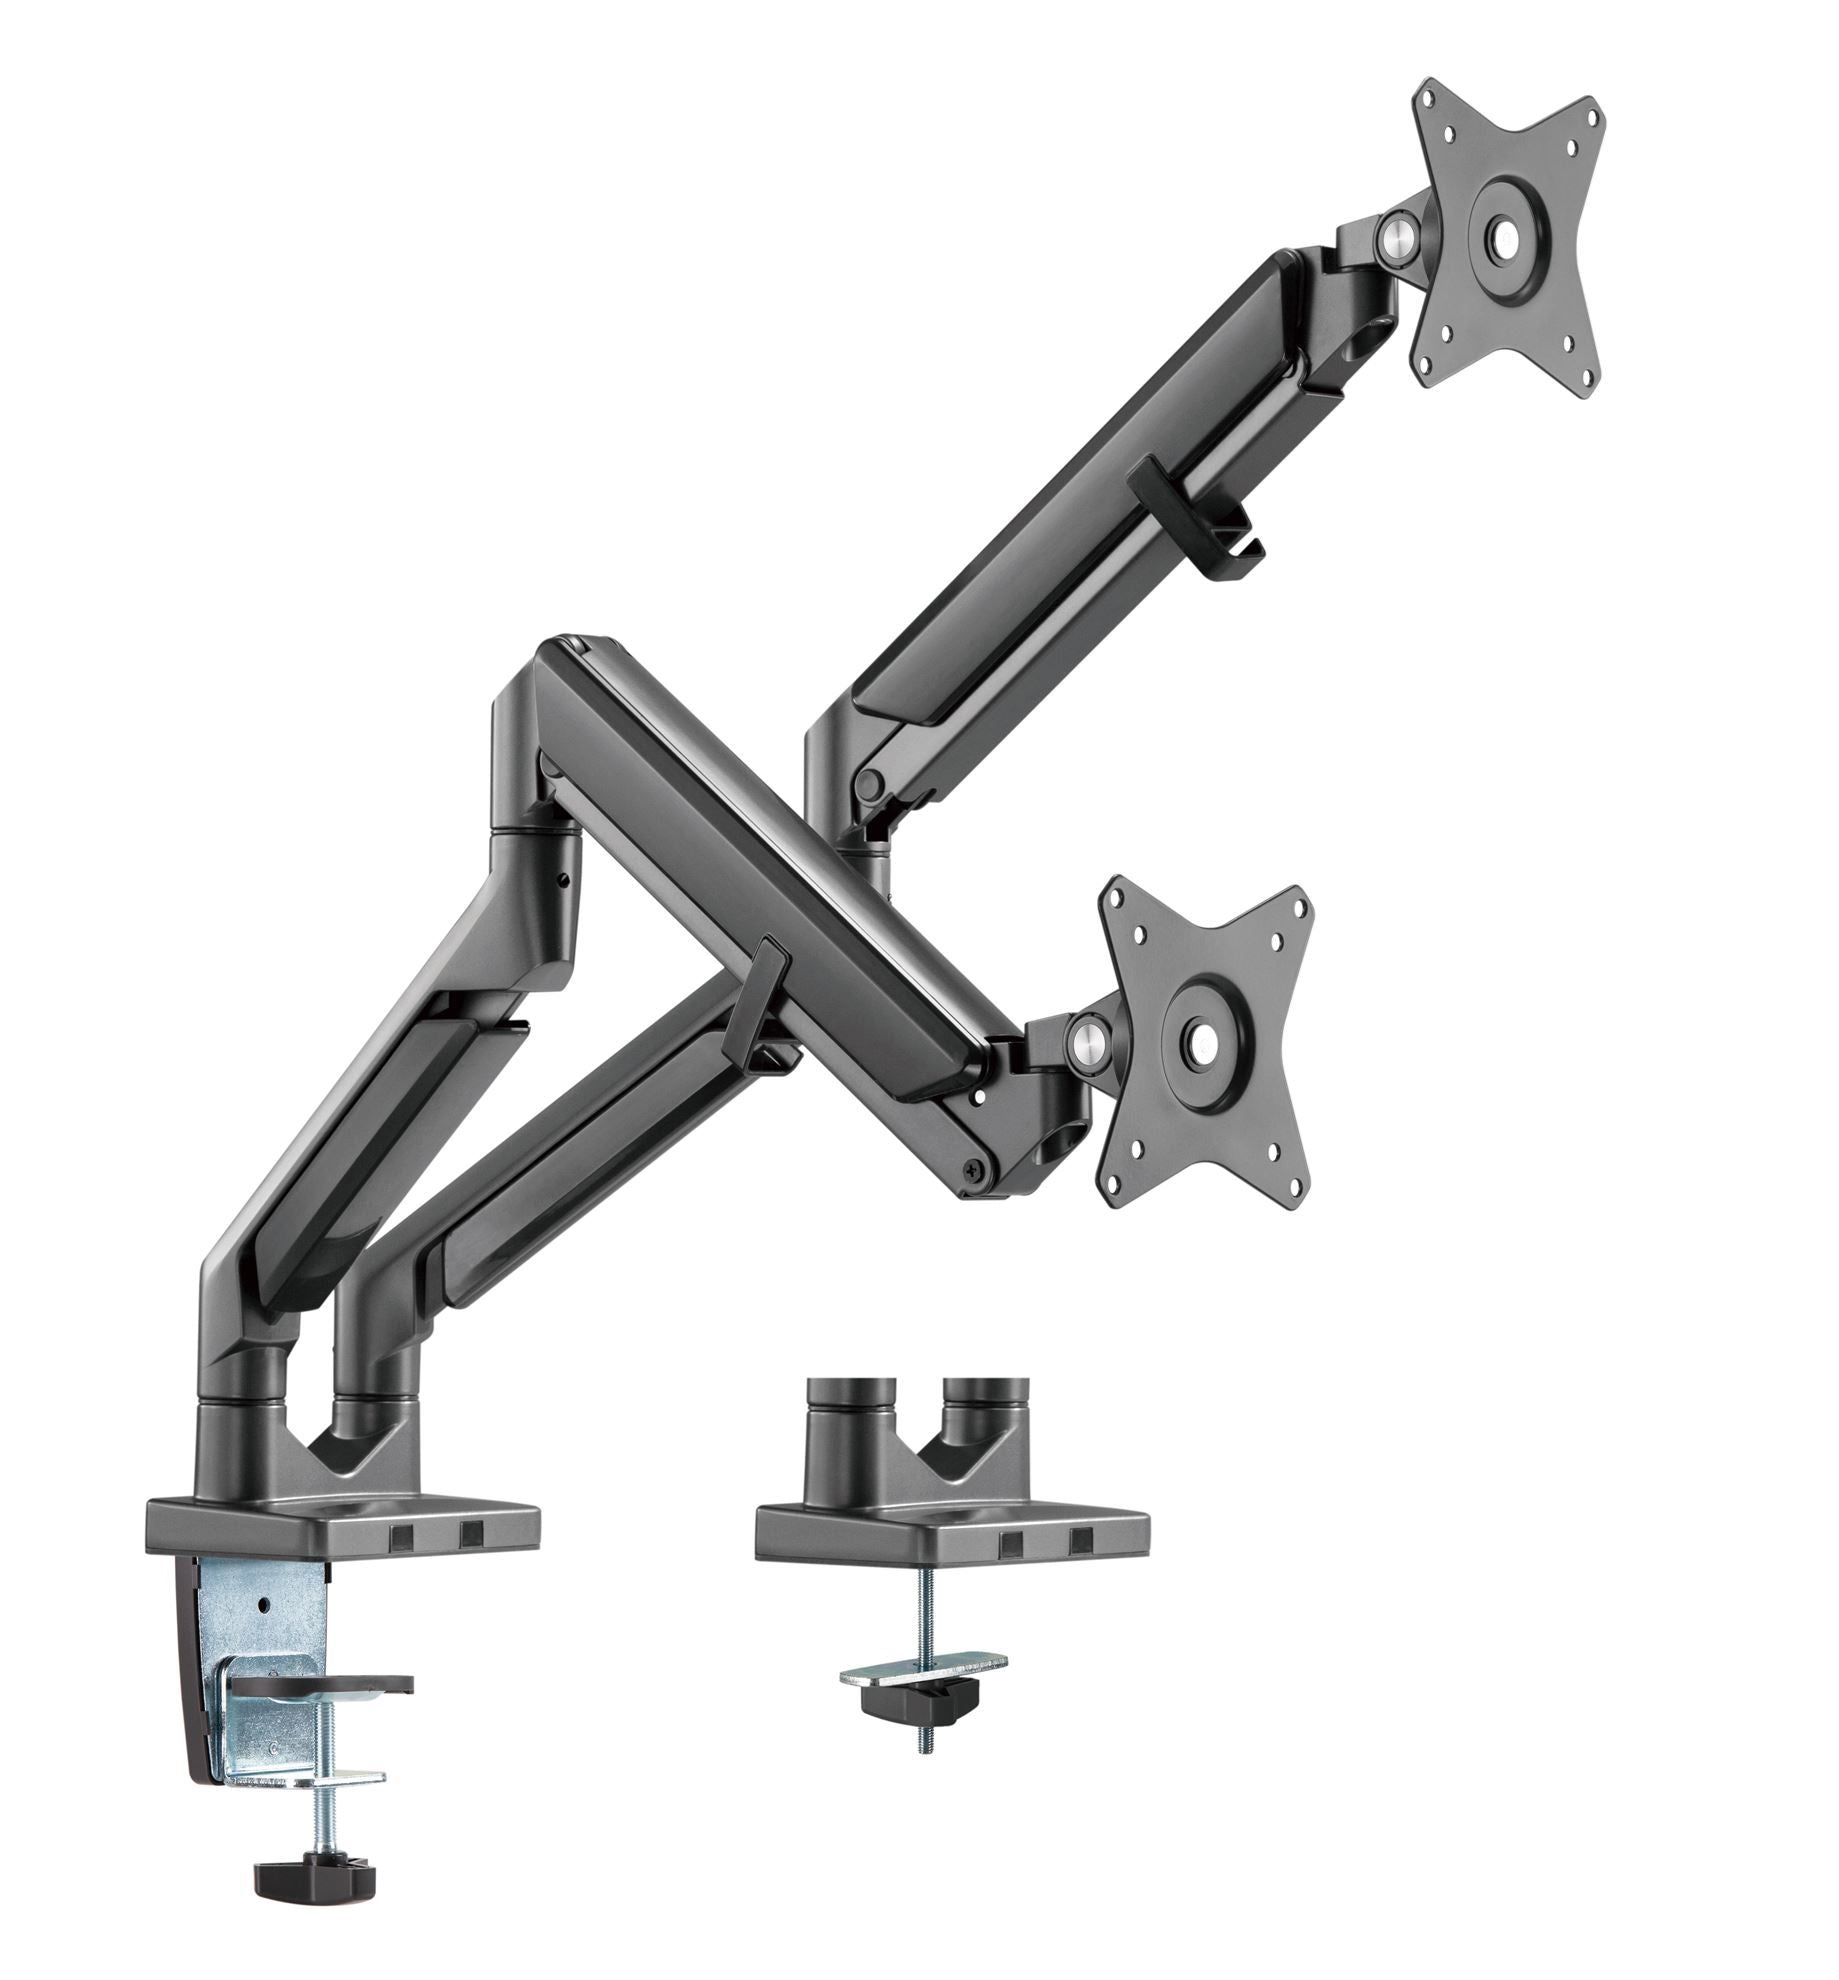 BRATECK 17''-32'' Polished Aluminium Gas-Spring Desk Mount Duel Monitor Arm. Supports VESA up to 100x100